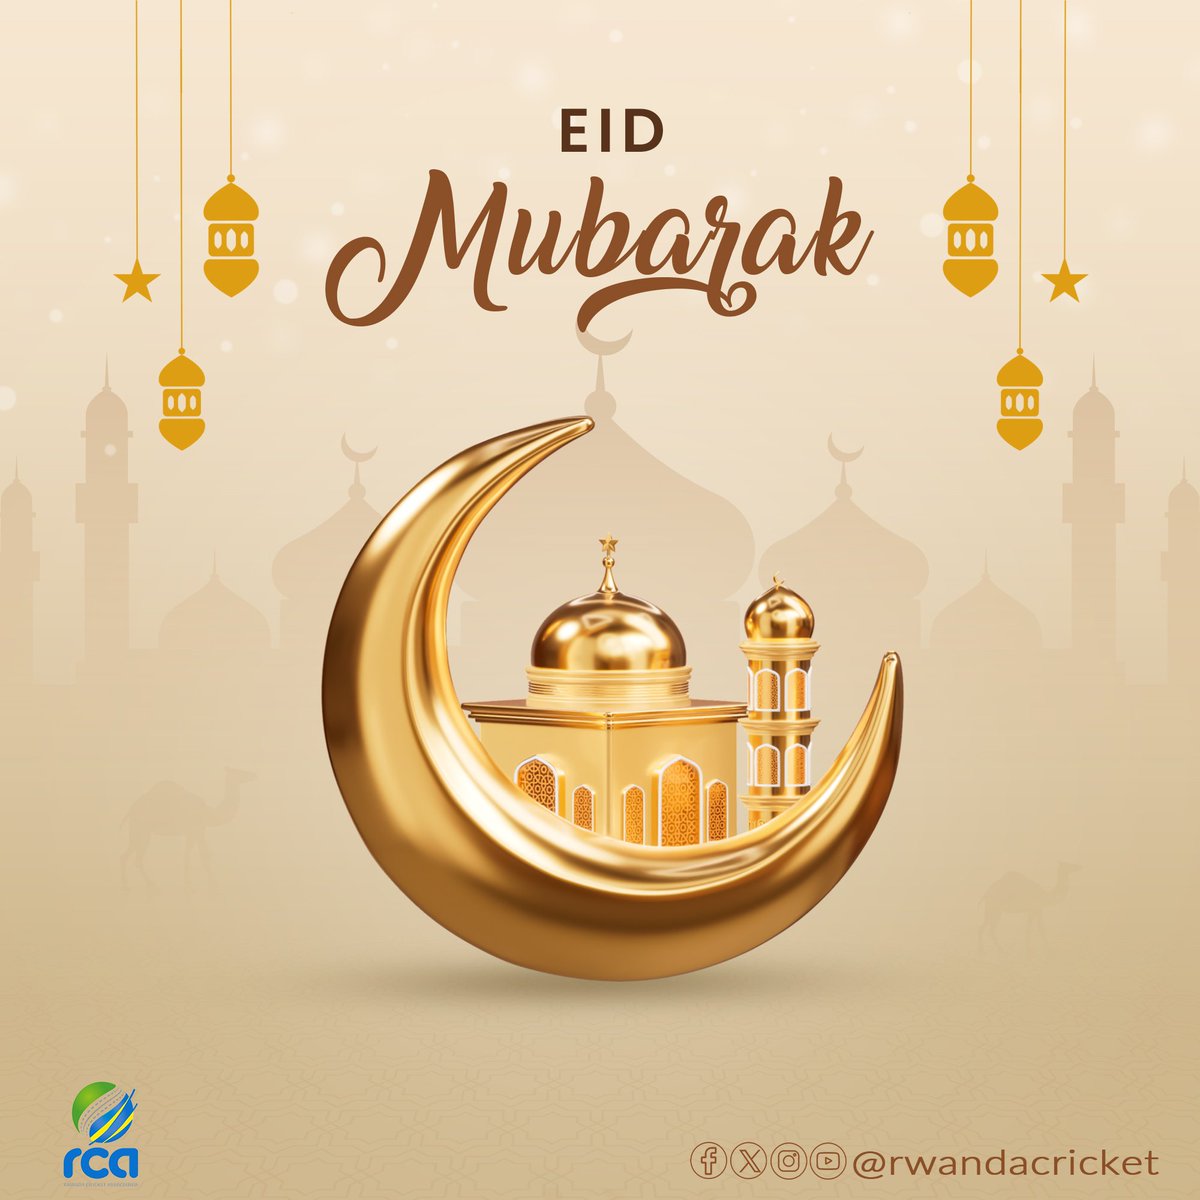 Eid Mubarak to all Muslims celebrating today. @RwandaCricket, we wish you a celebration filled with blessings, love, and happiness.